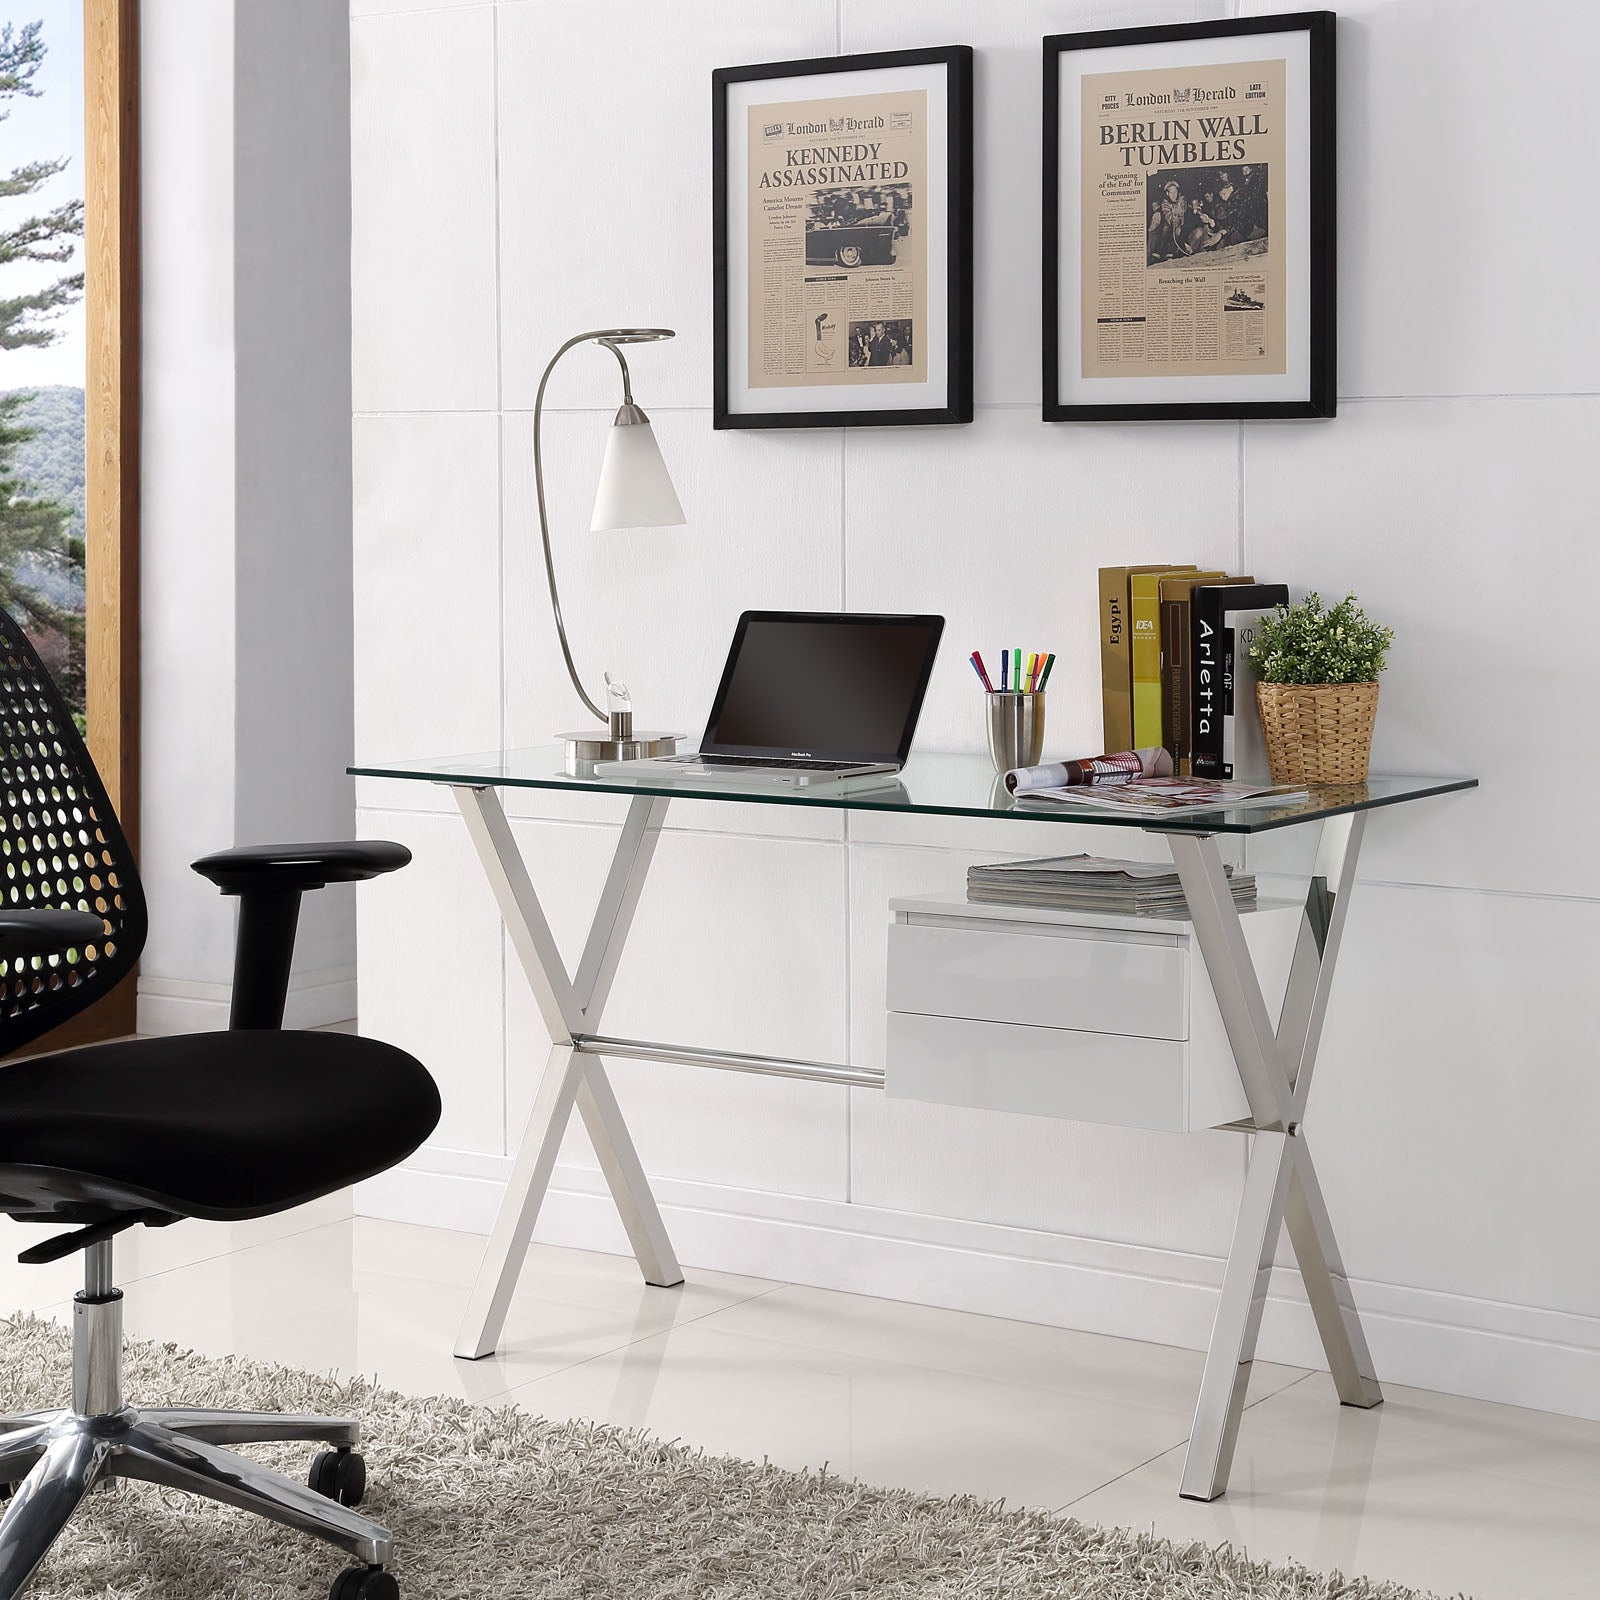 Shop Stasis Glass Top Office Desk for Modern Offices at BUILDMyplace